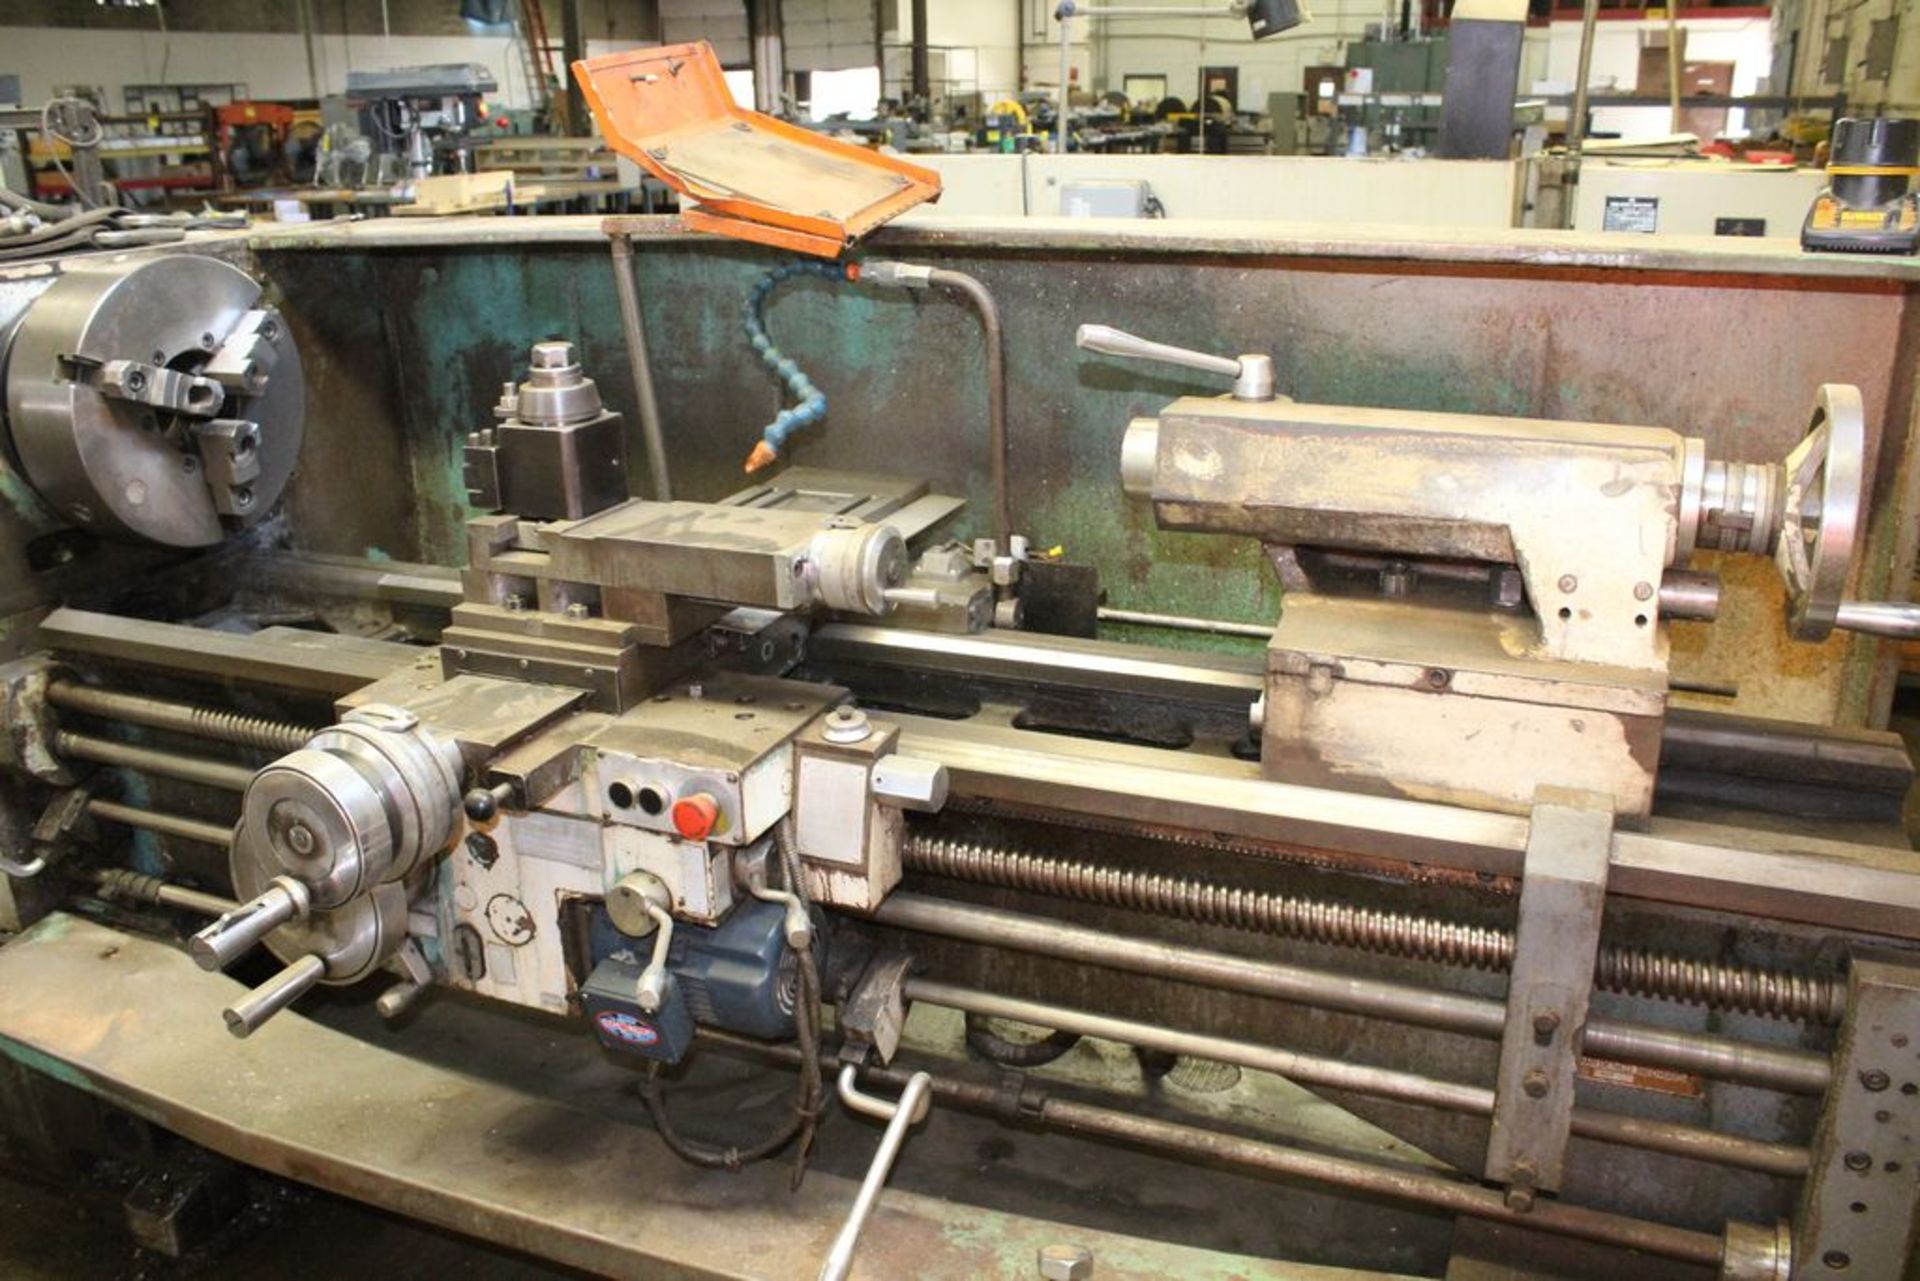 PROMASTER 2160 GAP BED LATHE, 21" SWING WITH 60" BETWEEN CENTERS, 12" GAP, 1,800 RPM, 4" HIS, WITH - Image 2 of 6